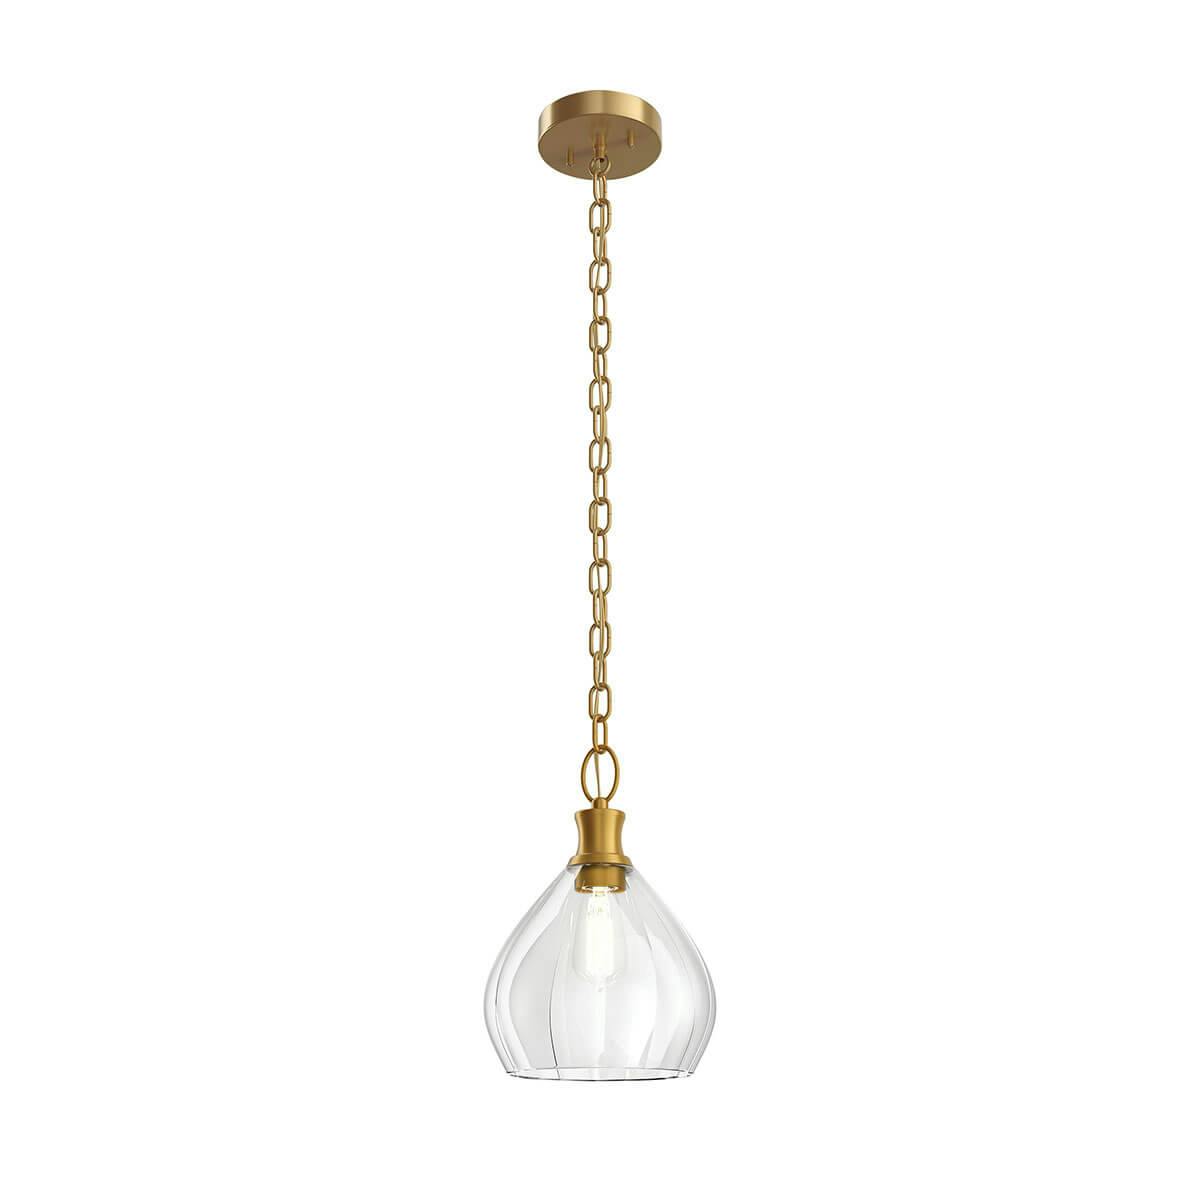 Merriam 8" 1 Light Pendant Classic Gold on a white background